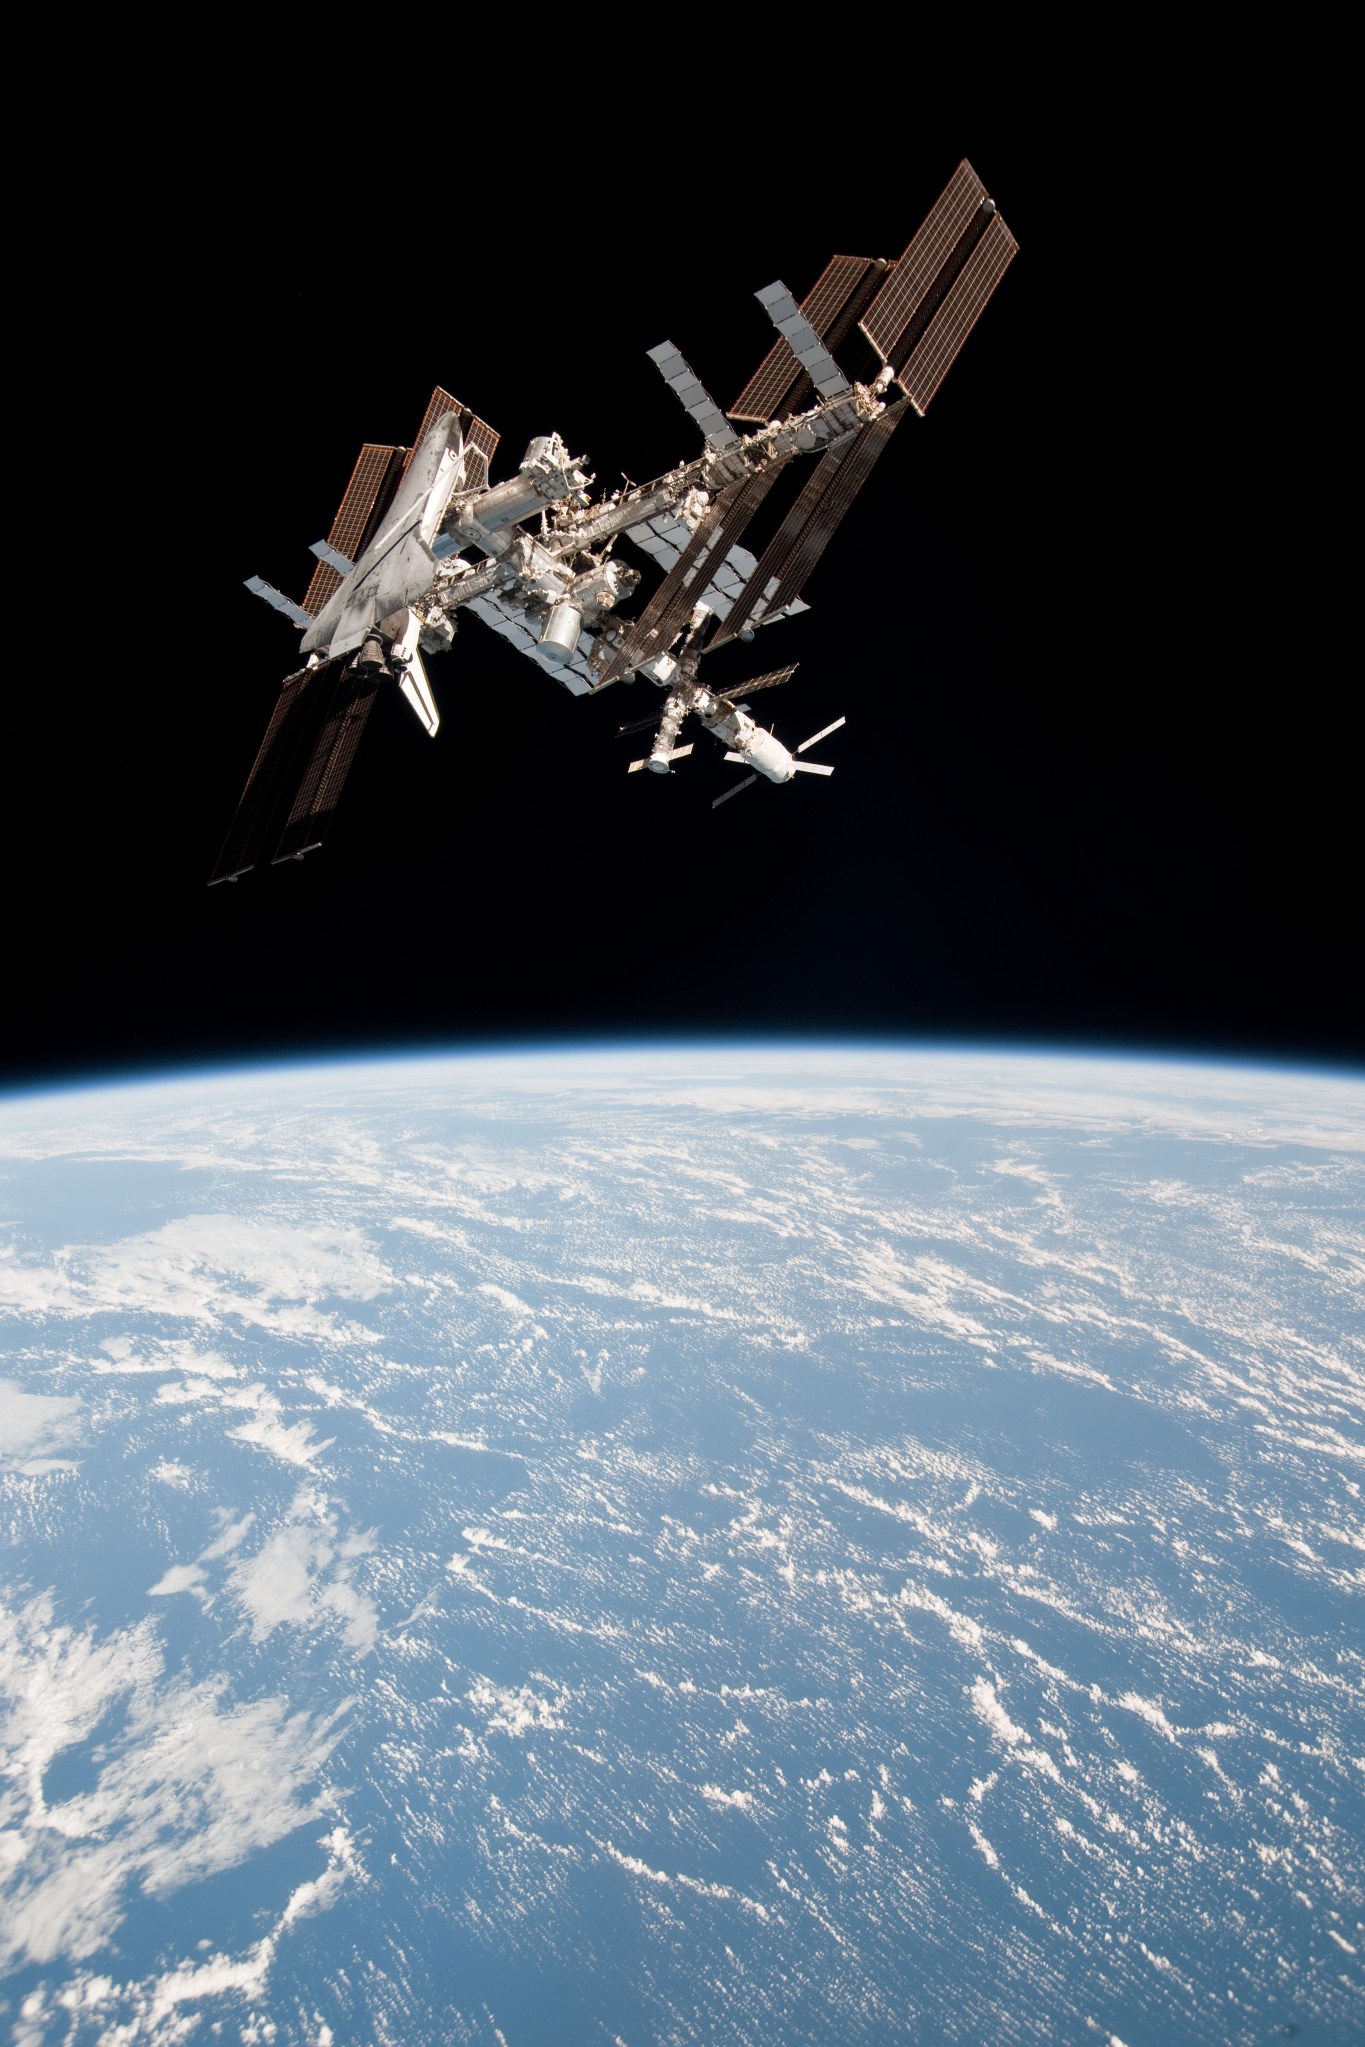 Space shuttle Endeavour docked to the International Space Station during STS-134.